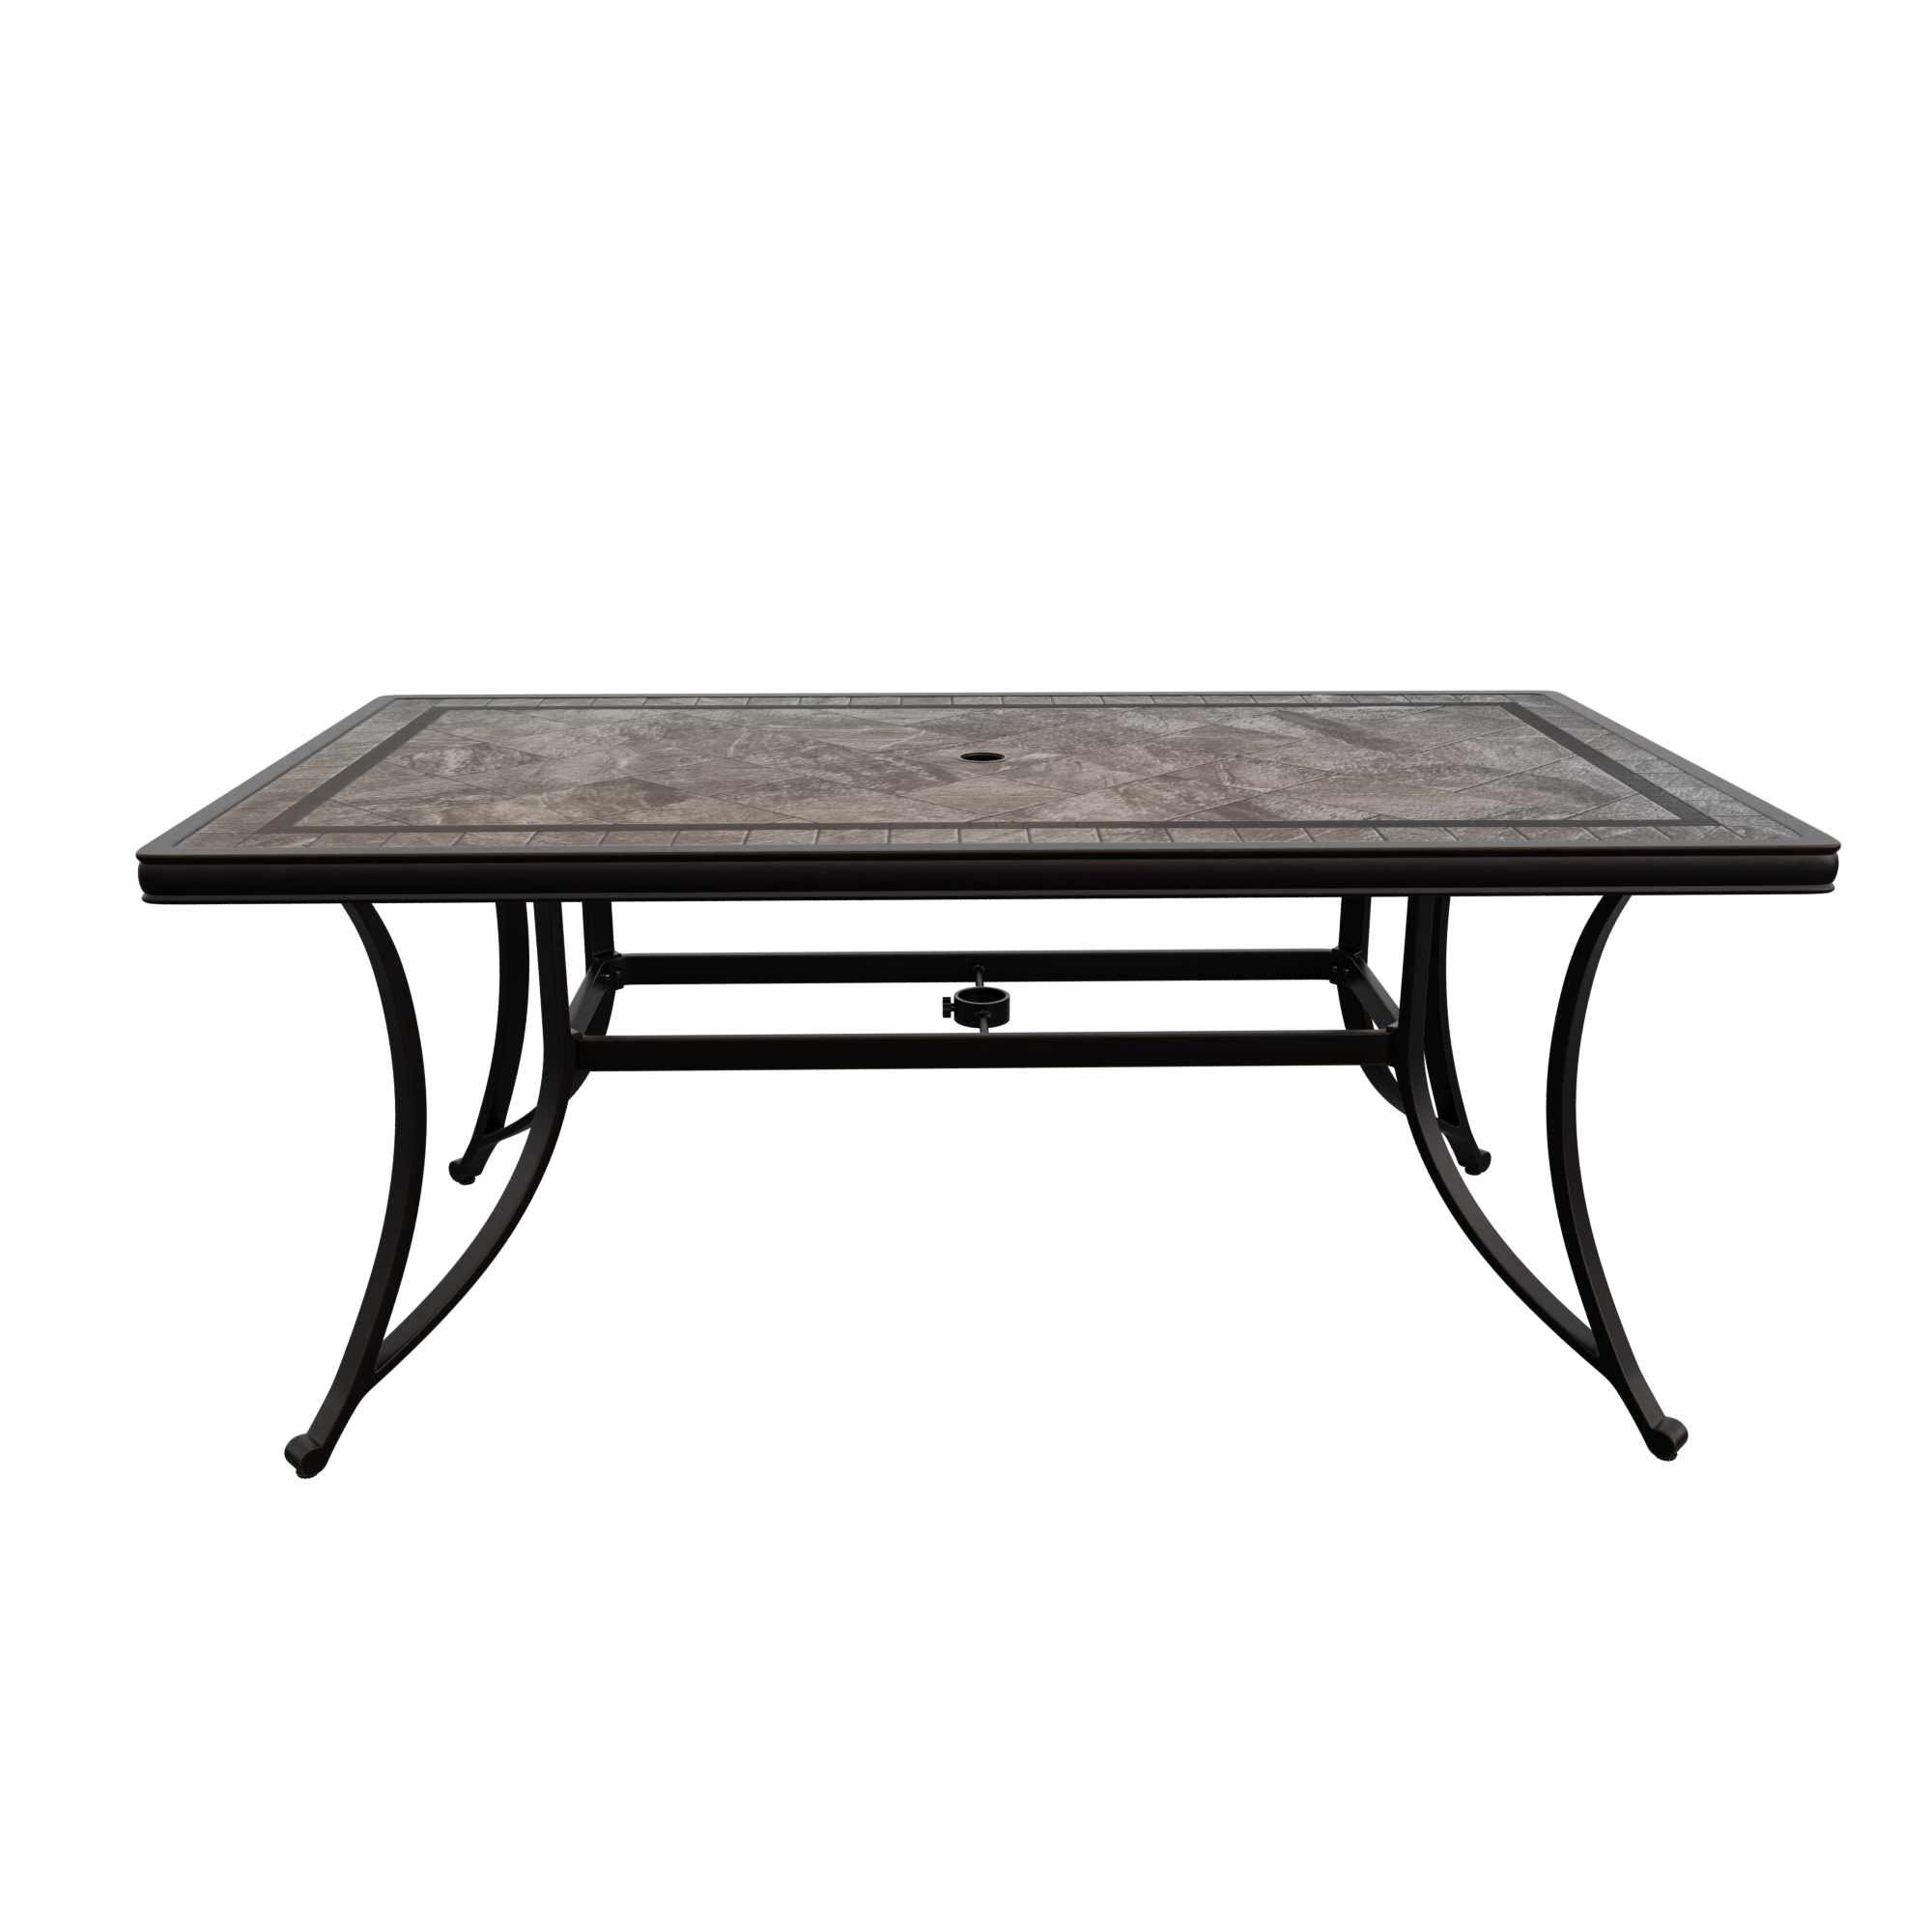 Mondawe Gray Frame Rectangle Aluminum 28 in. H Outdoor Dining Table with Umbrella Hole and Dark Gold Finished-Mondawe